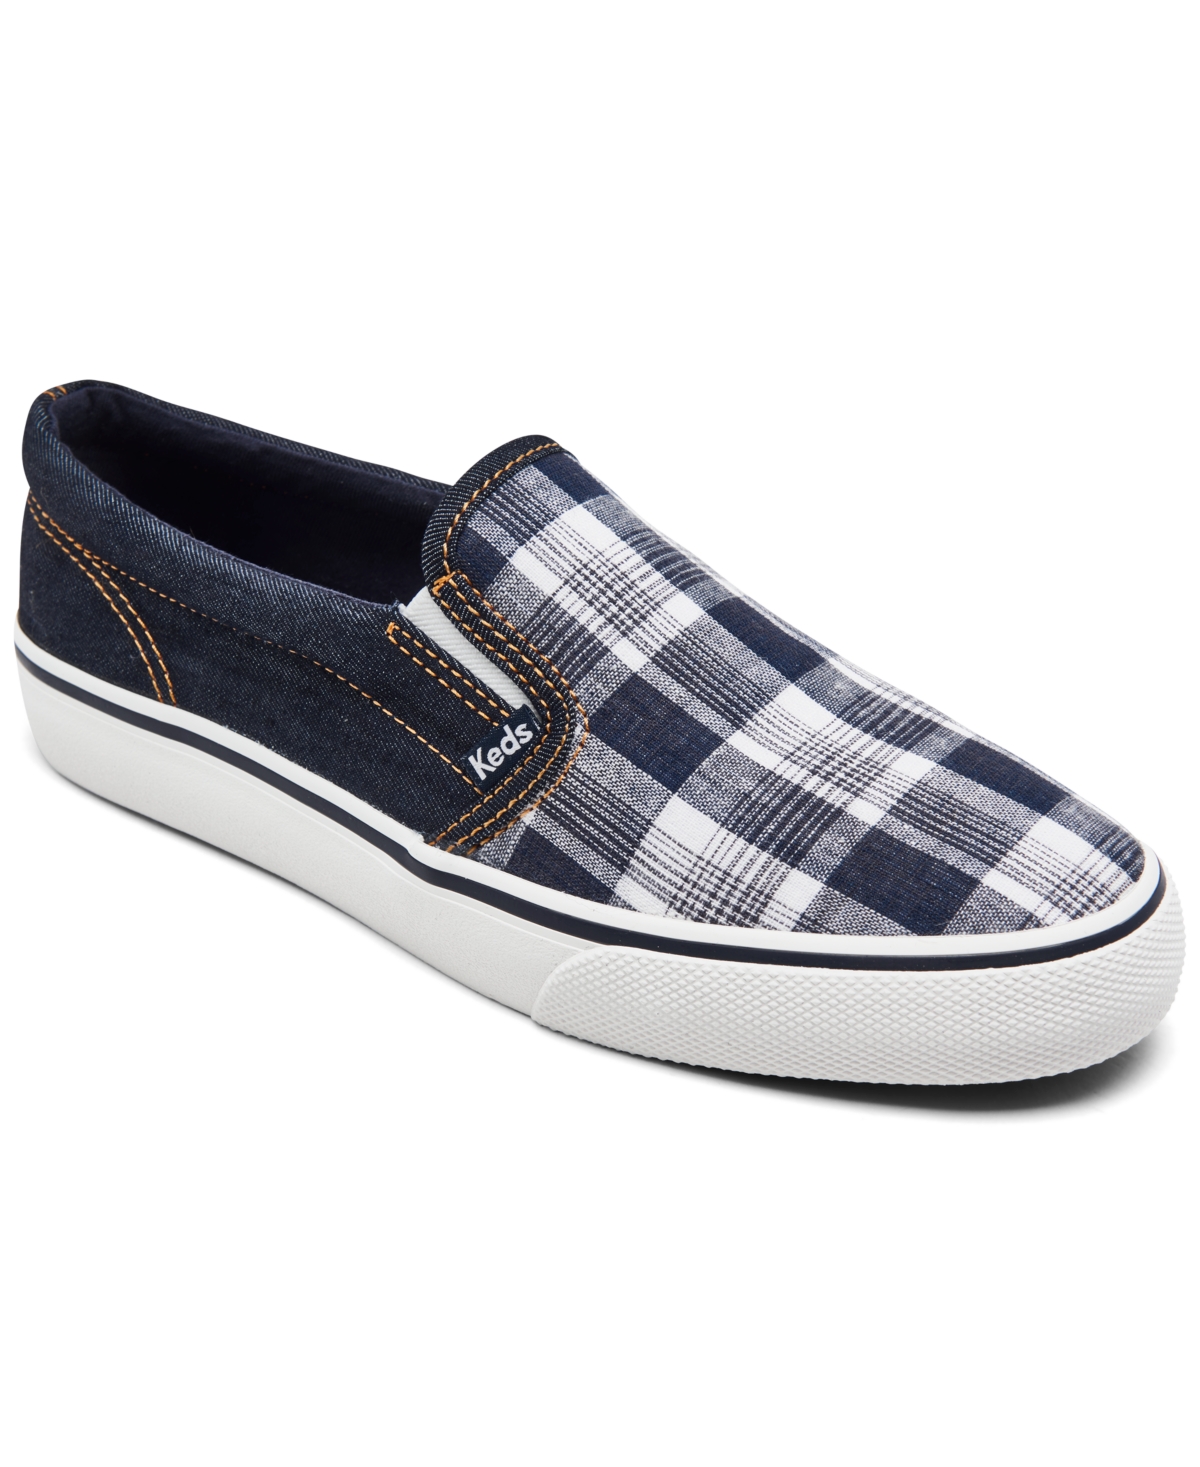 UPC 195018114778 product image for Keds Women's Jump Kick Slip-On Canvas Casual Sneakers from Finish Line | upcitemdb.com